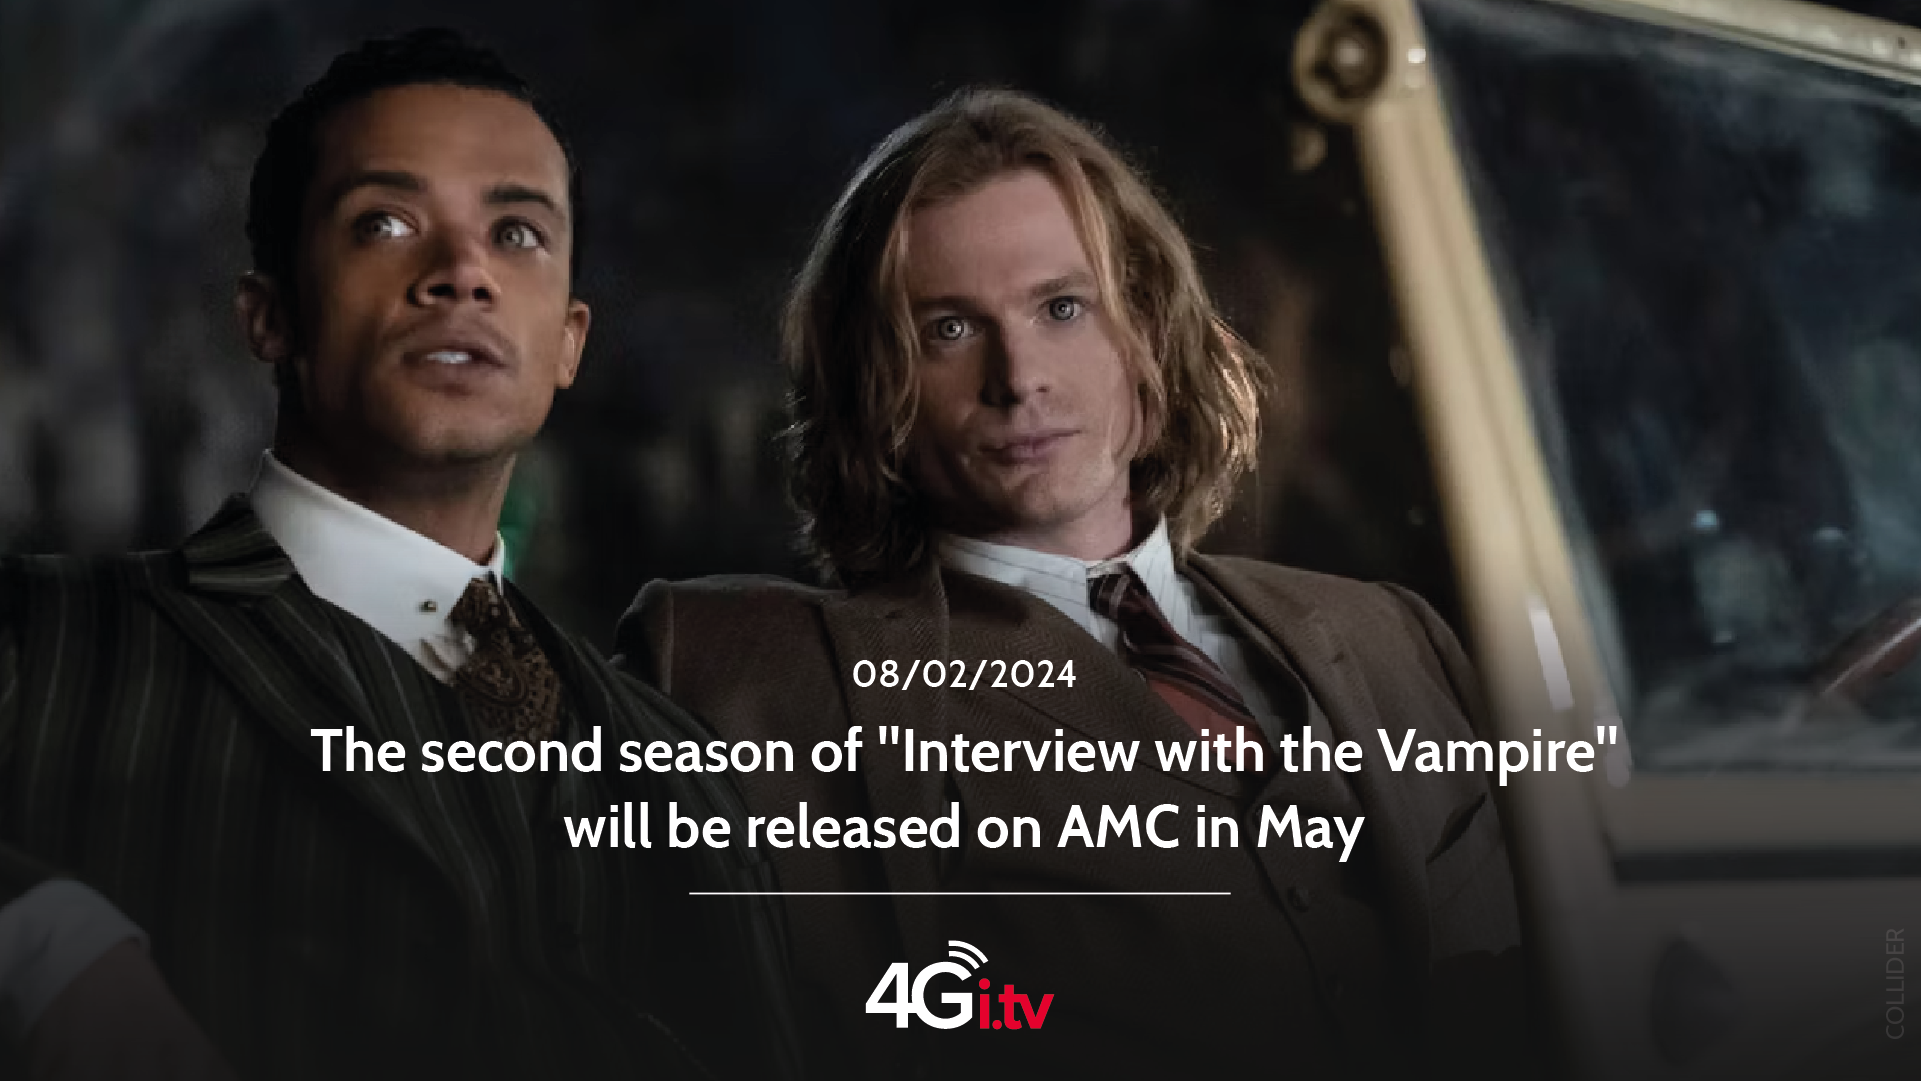 Подробнее о статье The second season of “Interview with the Vampire” will be released on AMC in May 